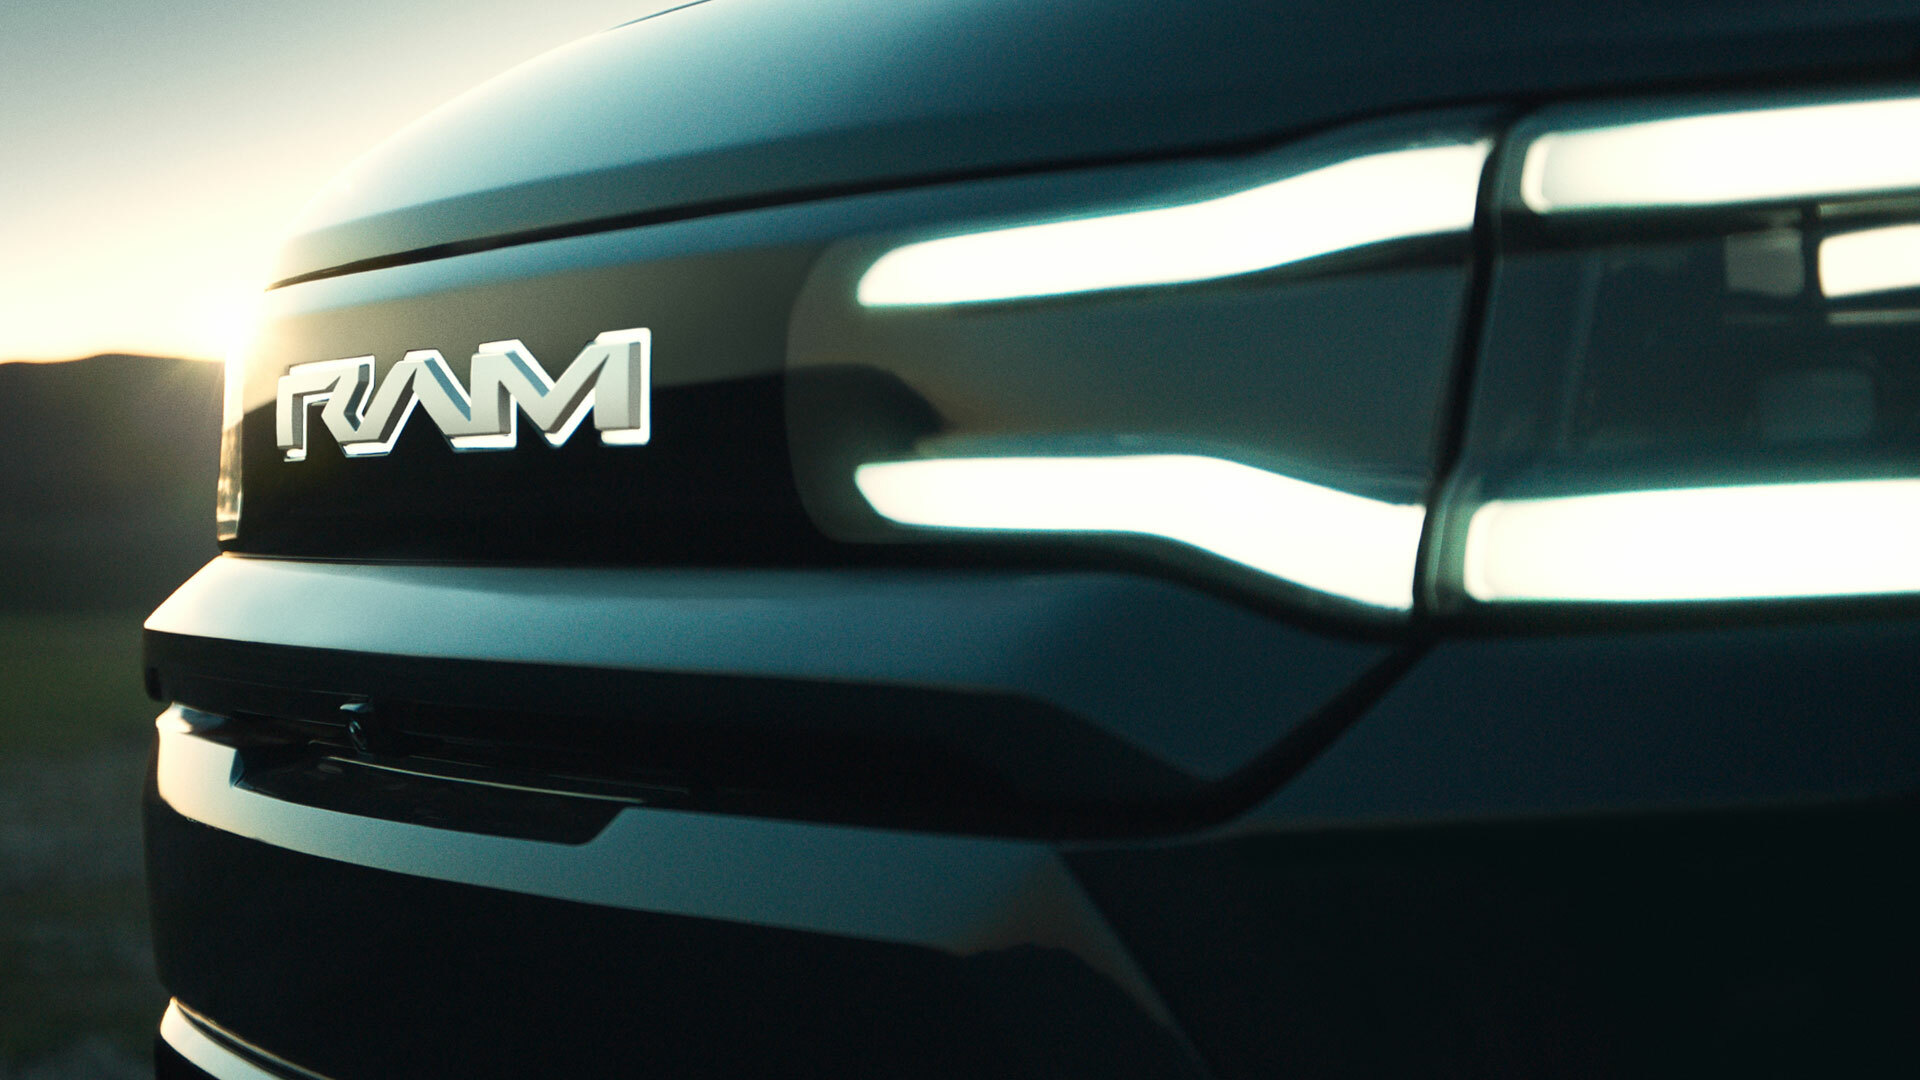 Ram reveals its electric truck during Super Bowl and it looks nothing like  the concept